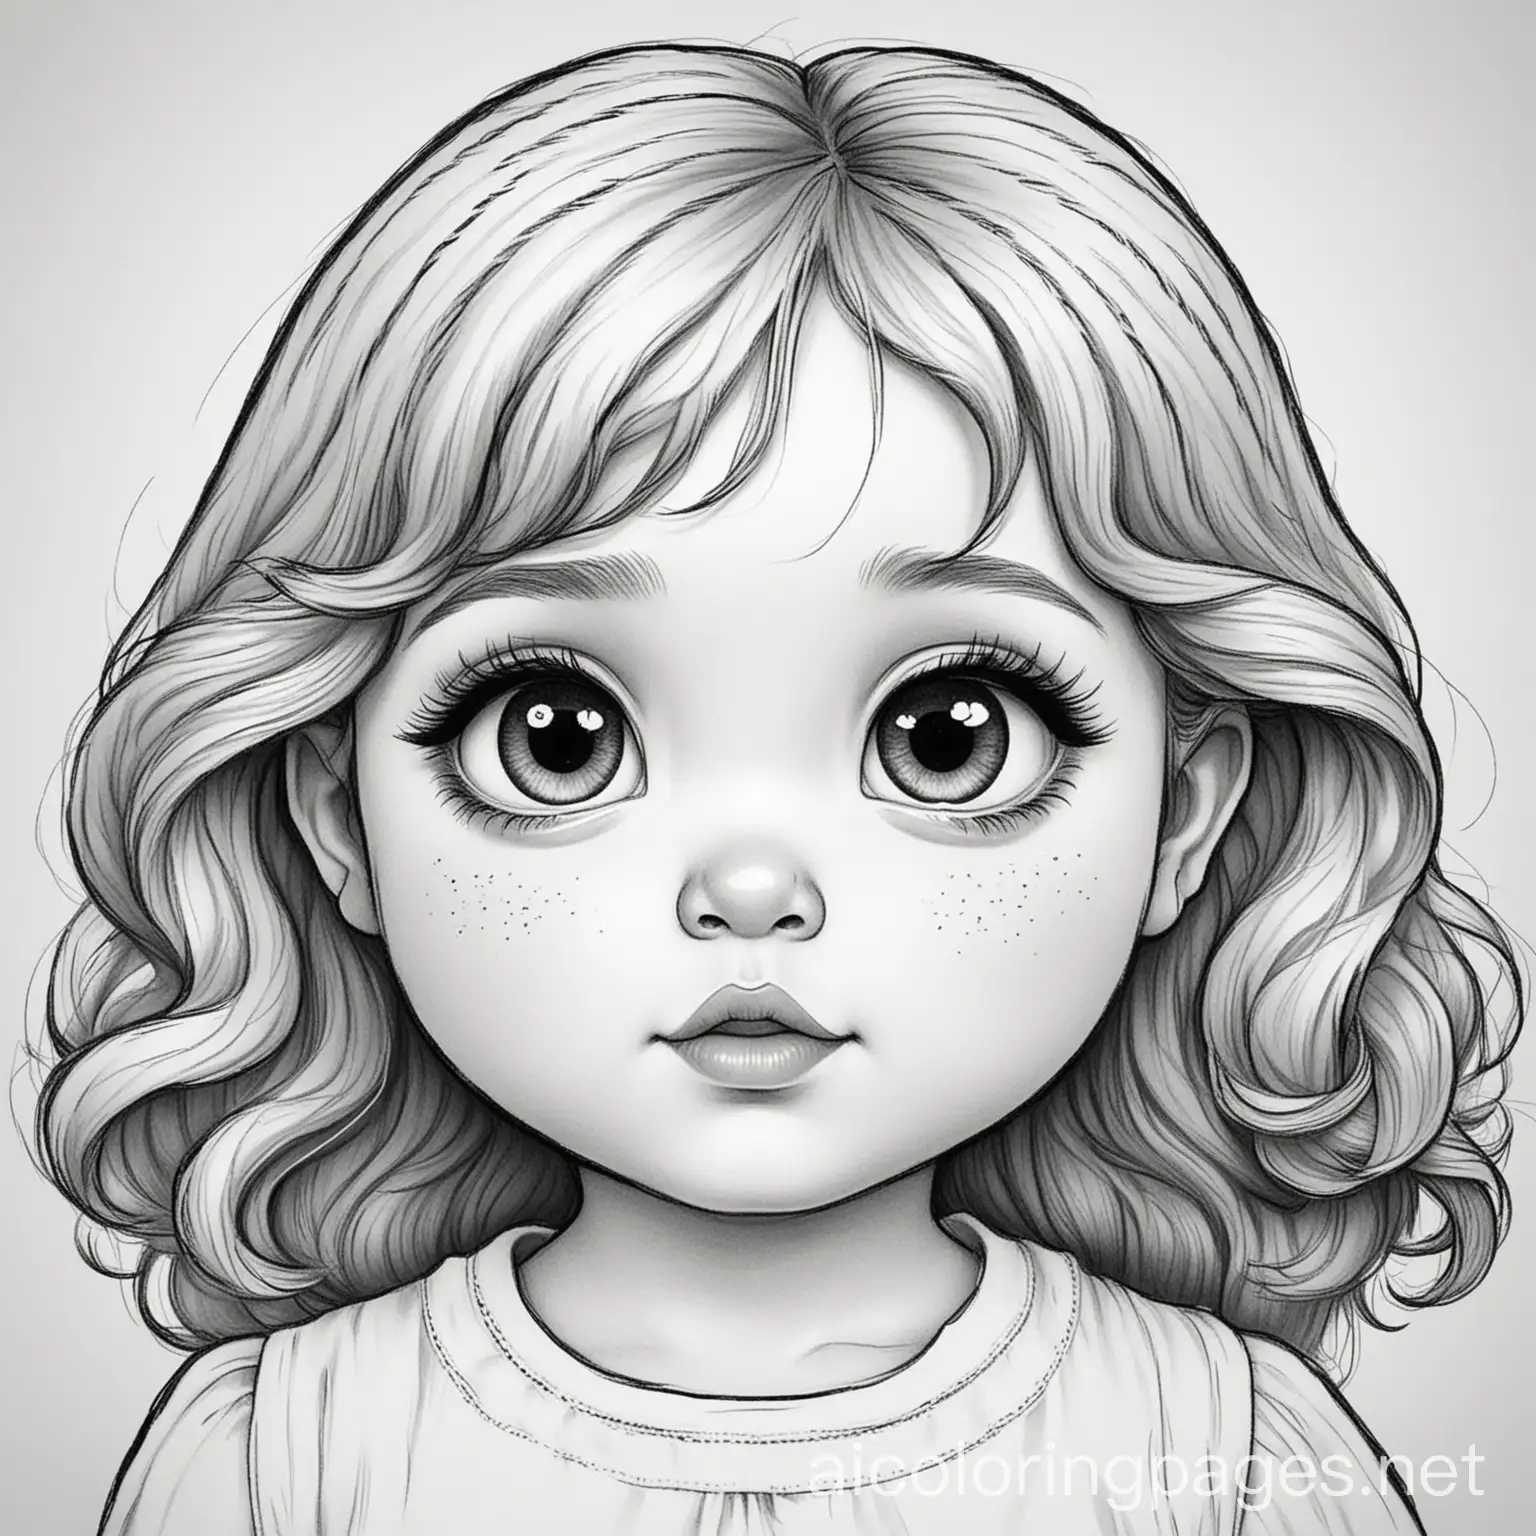 Baby girl with wavy hair and big eyes, and a chubby face, Coloring Page, black and white, line art, white background, Simplicity, Ample White Space. The background of the coloring page is plain white to make it easy for young children to color within the lines. The outlines of all the subjects are easy to distinguish, making it simple for kids to color without too much difficulty